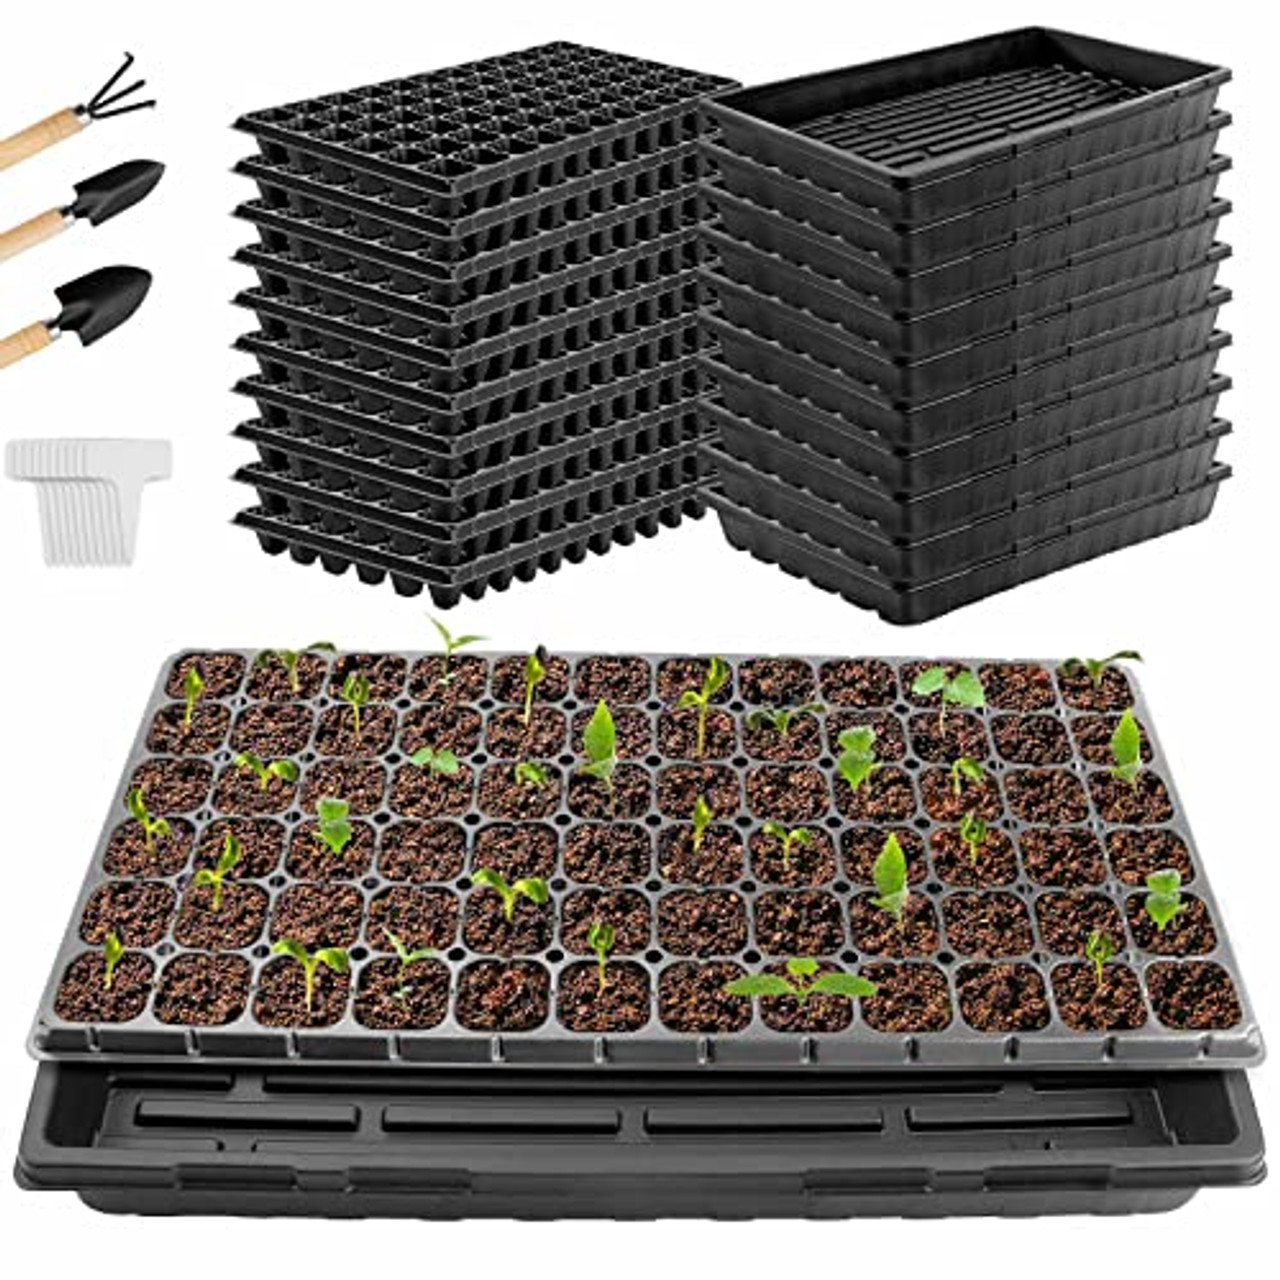 Plant Trays, Garden Seed Growing Trays